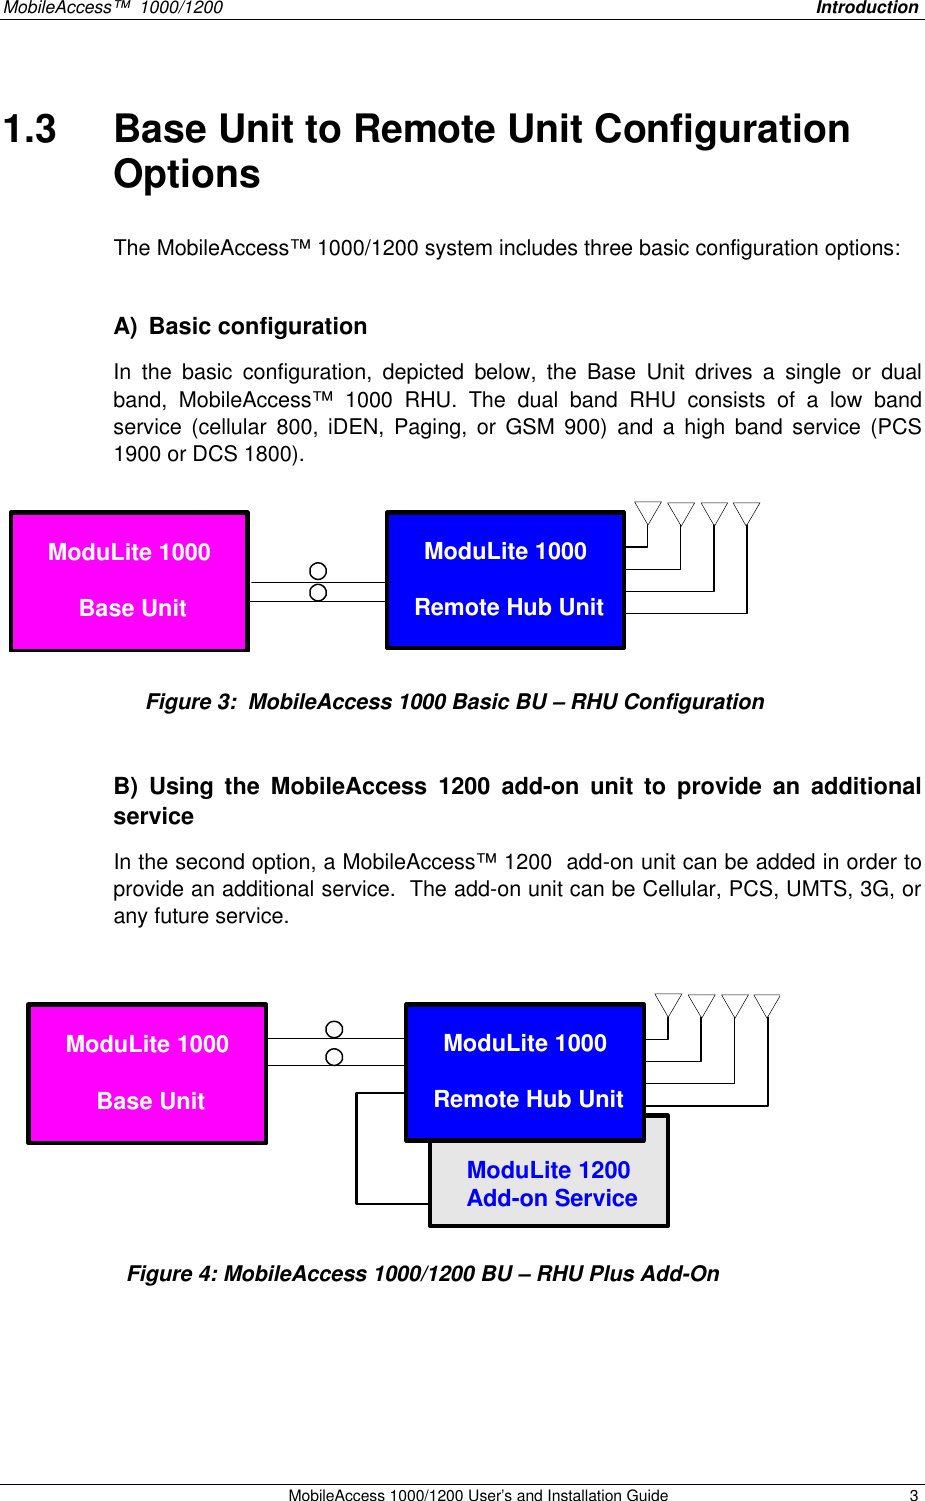 MobileAccess™  1000/1200    Introduction  MobileAccess 1000/1200 User’s and Installation Guide 3 1.3  Base Unit to Remote Unit Configuration Options  The MobileAccess™ 1000/1200 system includes three basic configuration options:  A) Basic configuration In the basic configuration, depicted below, the Base Unit drives a single or dual band, MobileAccess™ 1000 RHU. The dual band RHU consists of a low band service (cellular 800, iDEN, Paging, or GSM 900) and a high band service (PCS 1900 or DCS 1800).  ModuLite 1000 Remote Hub UnitModuLite 1000 Base Unit     B) Using the MobileAccess 1200 add-on unit to provide an additional service In the second option, a MobileAccess™ 1200  add-on unit can be added in order to provide an additional service.  The add-on unit can be Cellular, PCS, UMTS, 3G, or any future service.   ModuLite 1200 Add-on ServiceModuLite 1000 Remote Hub UnitModuLite 1000 Base Unit     Figure 3:  MobileAccess 1000 Basic BU – RHU Configuration Figure 4: MobileAccess 1000/1200 BU – RHU Plus Add-On 